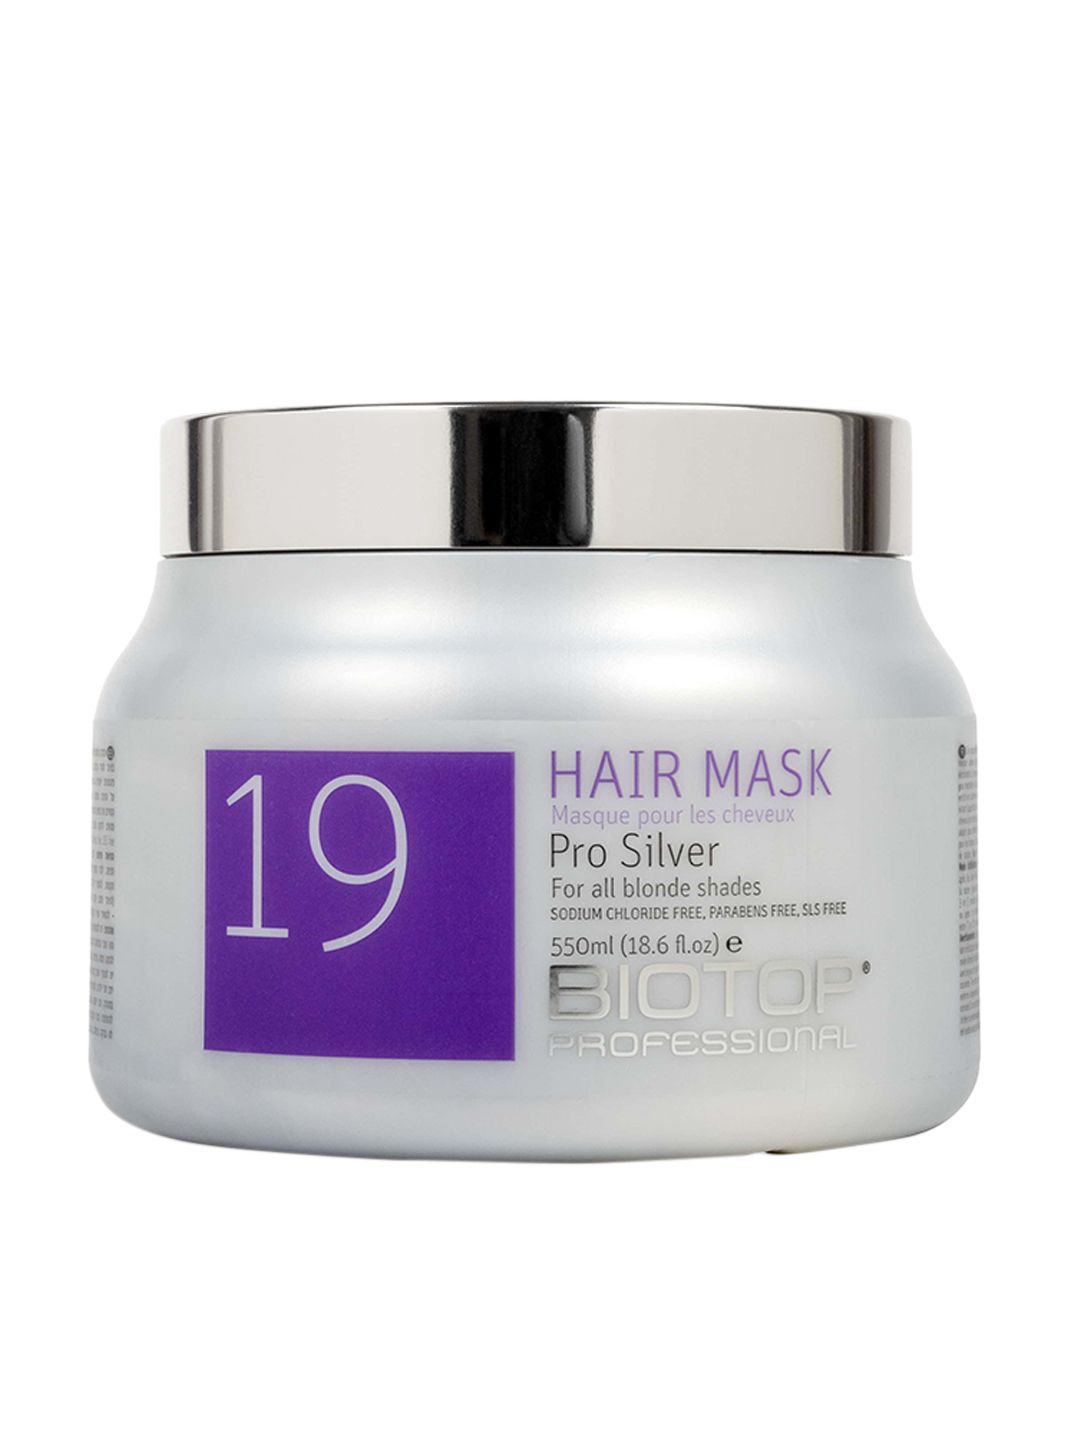 BIOTOP PROFESSIONAL 19 Pro Silver Hair Mask For All Blonde Shades 550ml Price in India